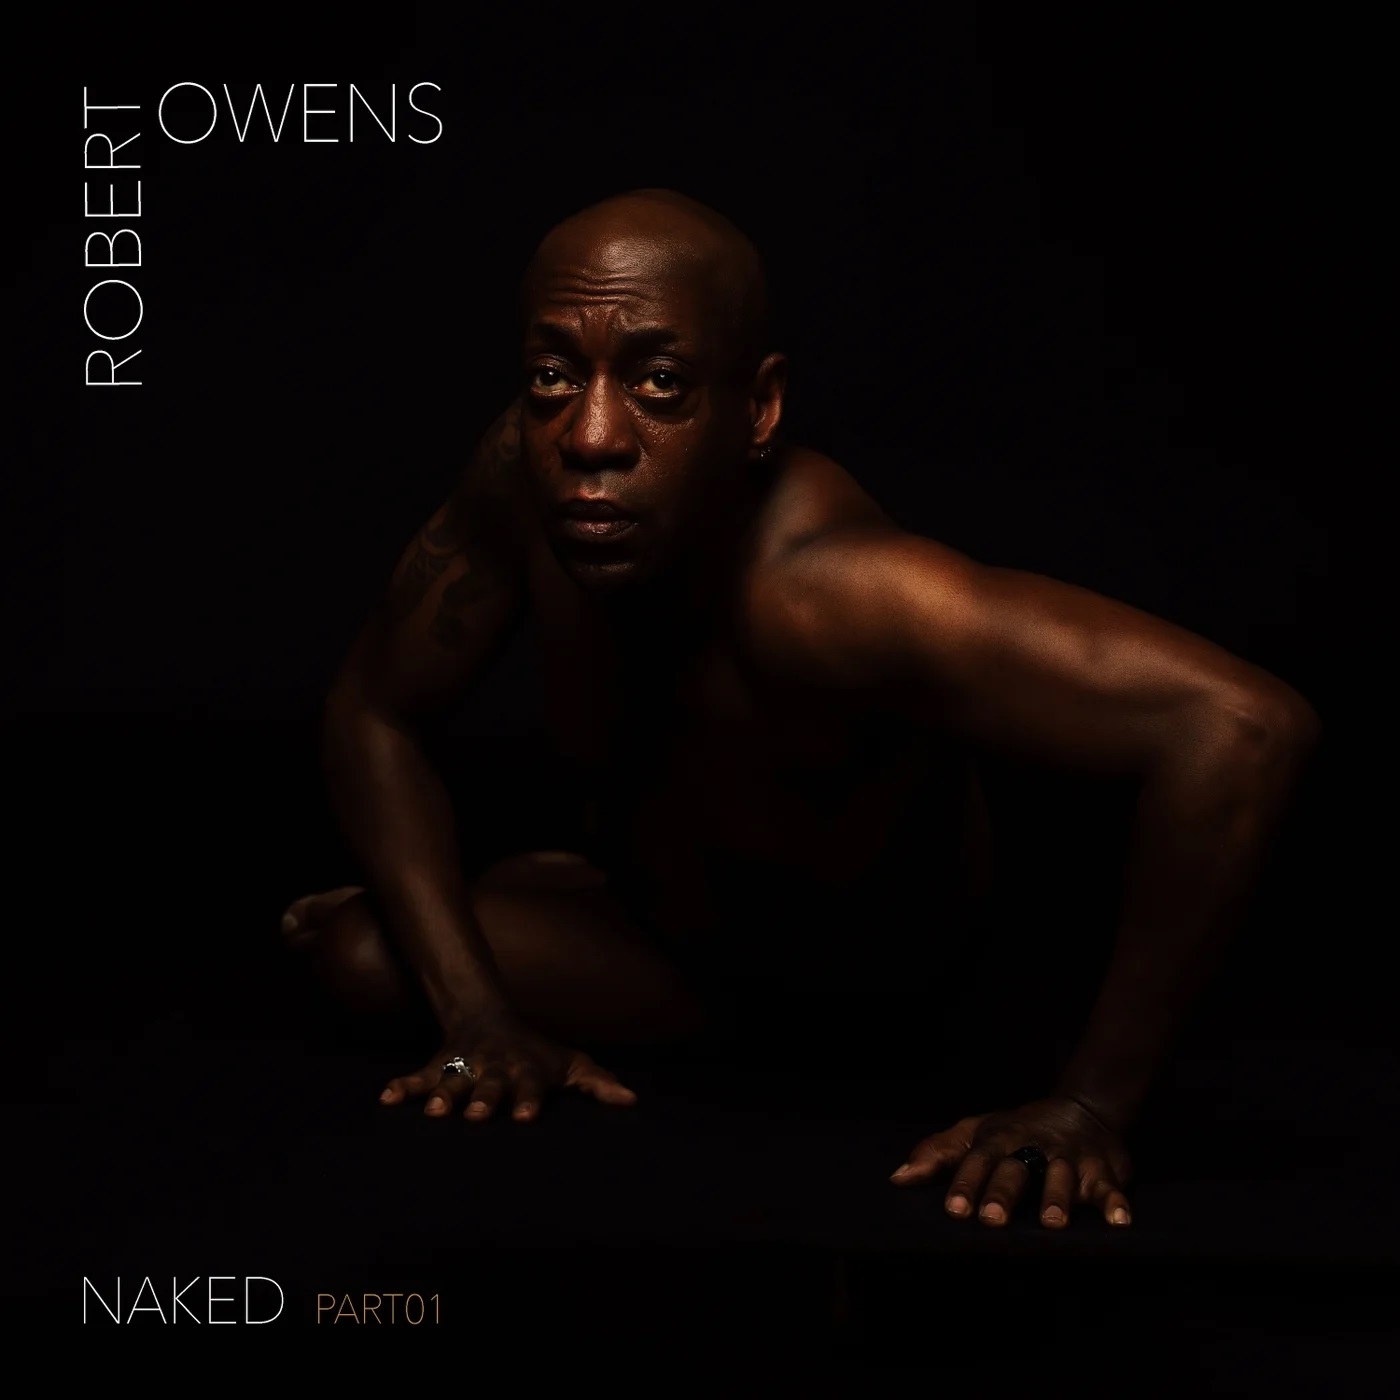 Robert Owens – Naked Pt. 1 (Musical Directions)